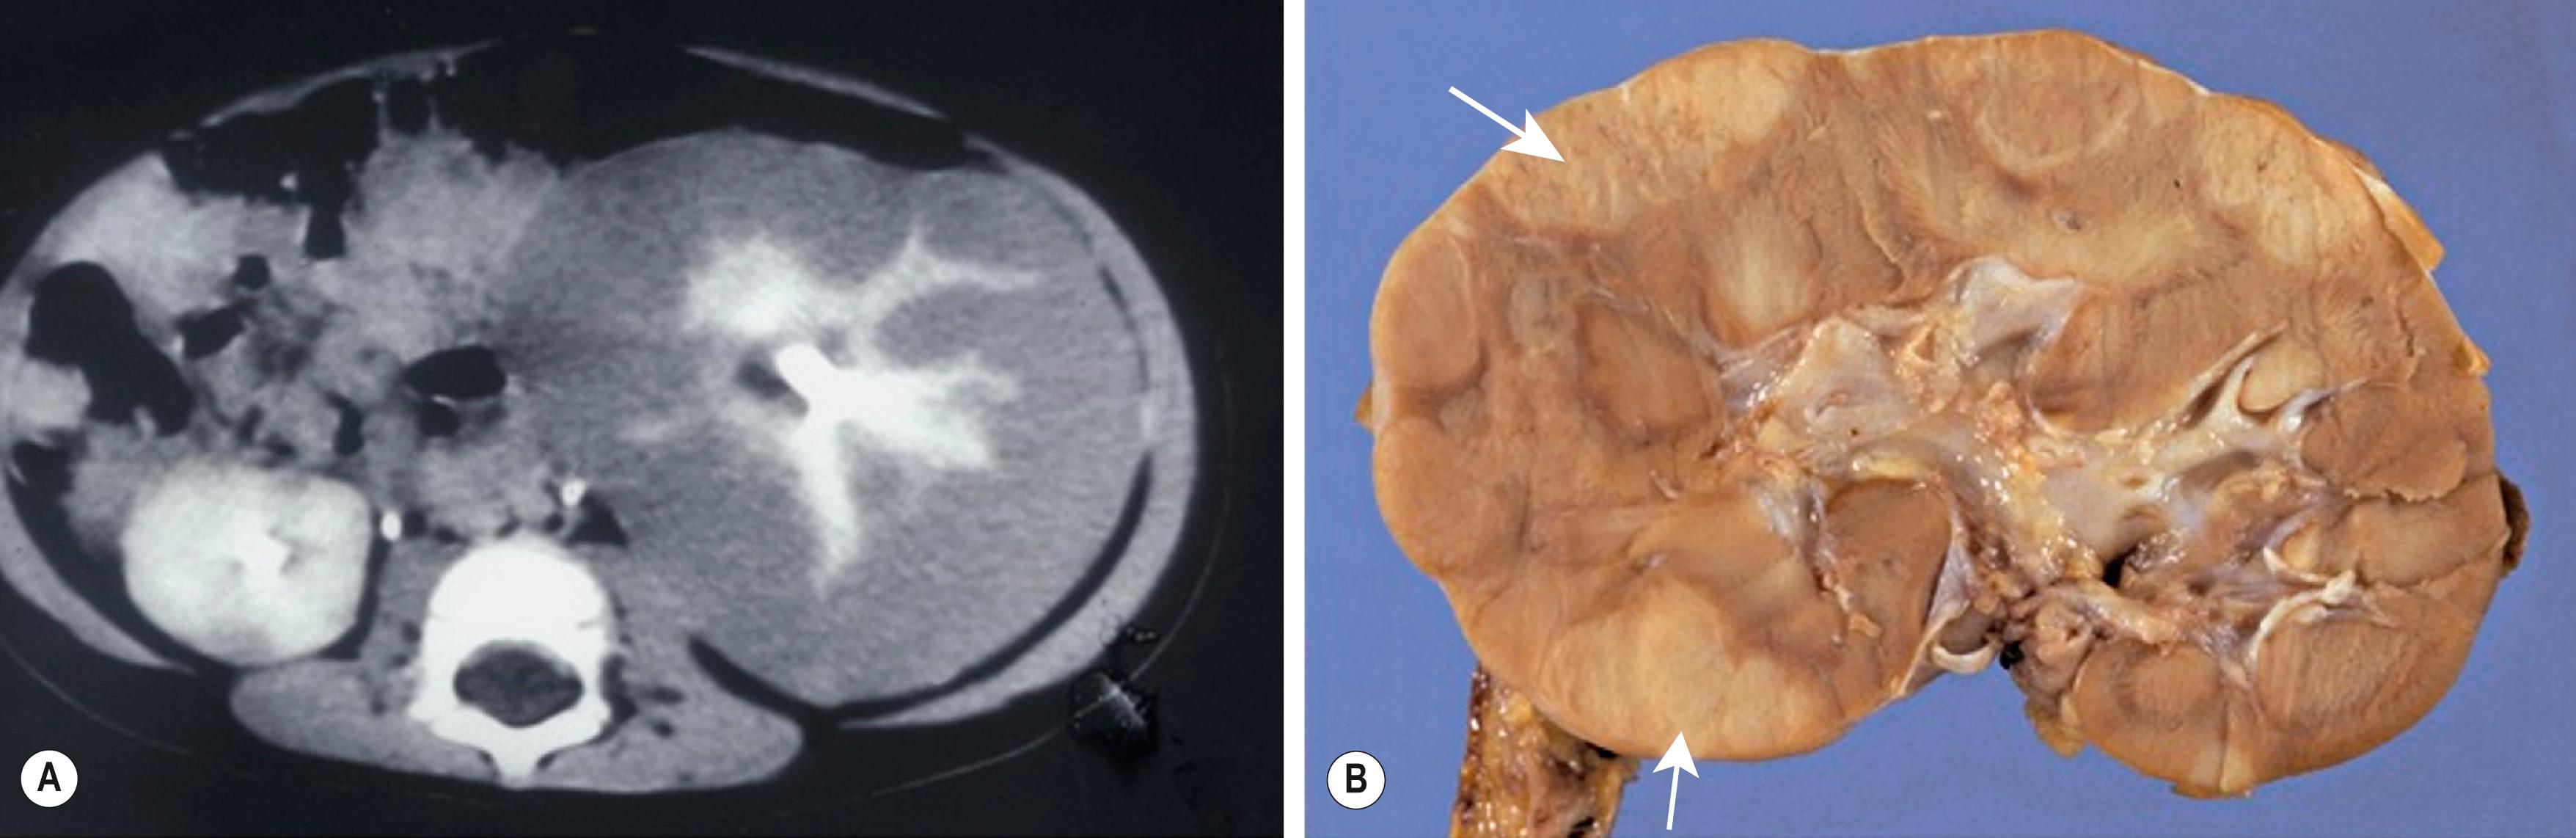 Fig. 64.3, (A) CT image of a 10-month-old infant who presented with a large left flank mass demonstrates a picture characteristic of diffuse hyperplastic perilobar nephroblastomatosis (DHPLN) with extensive involvement of the entire cortex of the kidney with no evidence of necrosis and general preservation of the shape of the kidney. (B) A resected kidney with a similar pattern of DHPLN reveals extensive involvement of the periphery of the cortex by severely hypertrophied nephrogenic rests (arrows). Resection of such kidneys should be avoided because, in most cases, the hypertrophy will resolve and the kidney will have excellent preservation of its function.